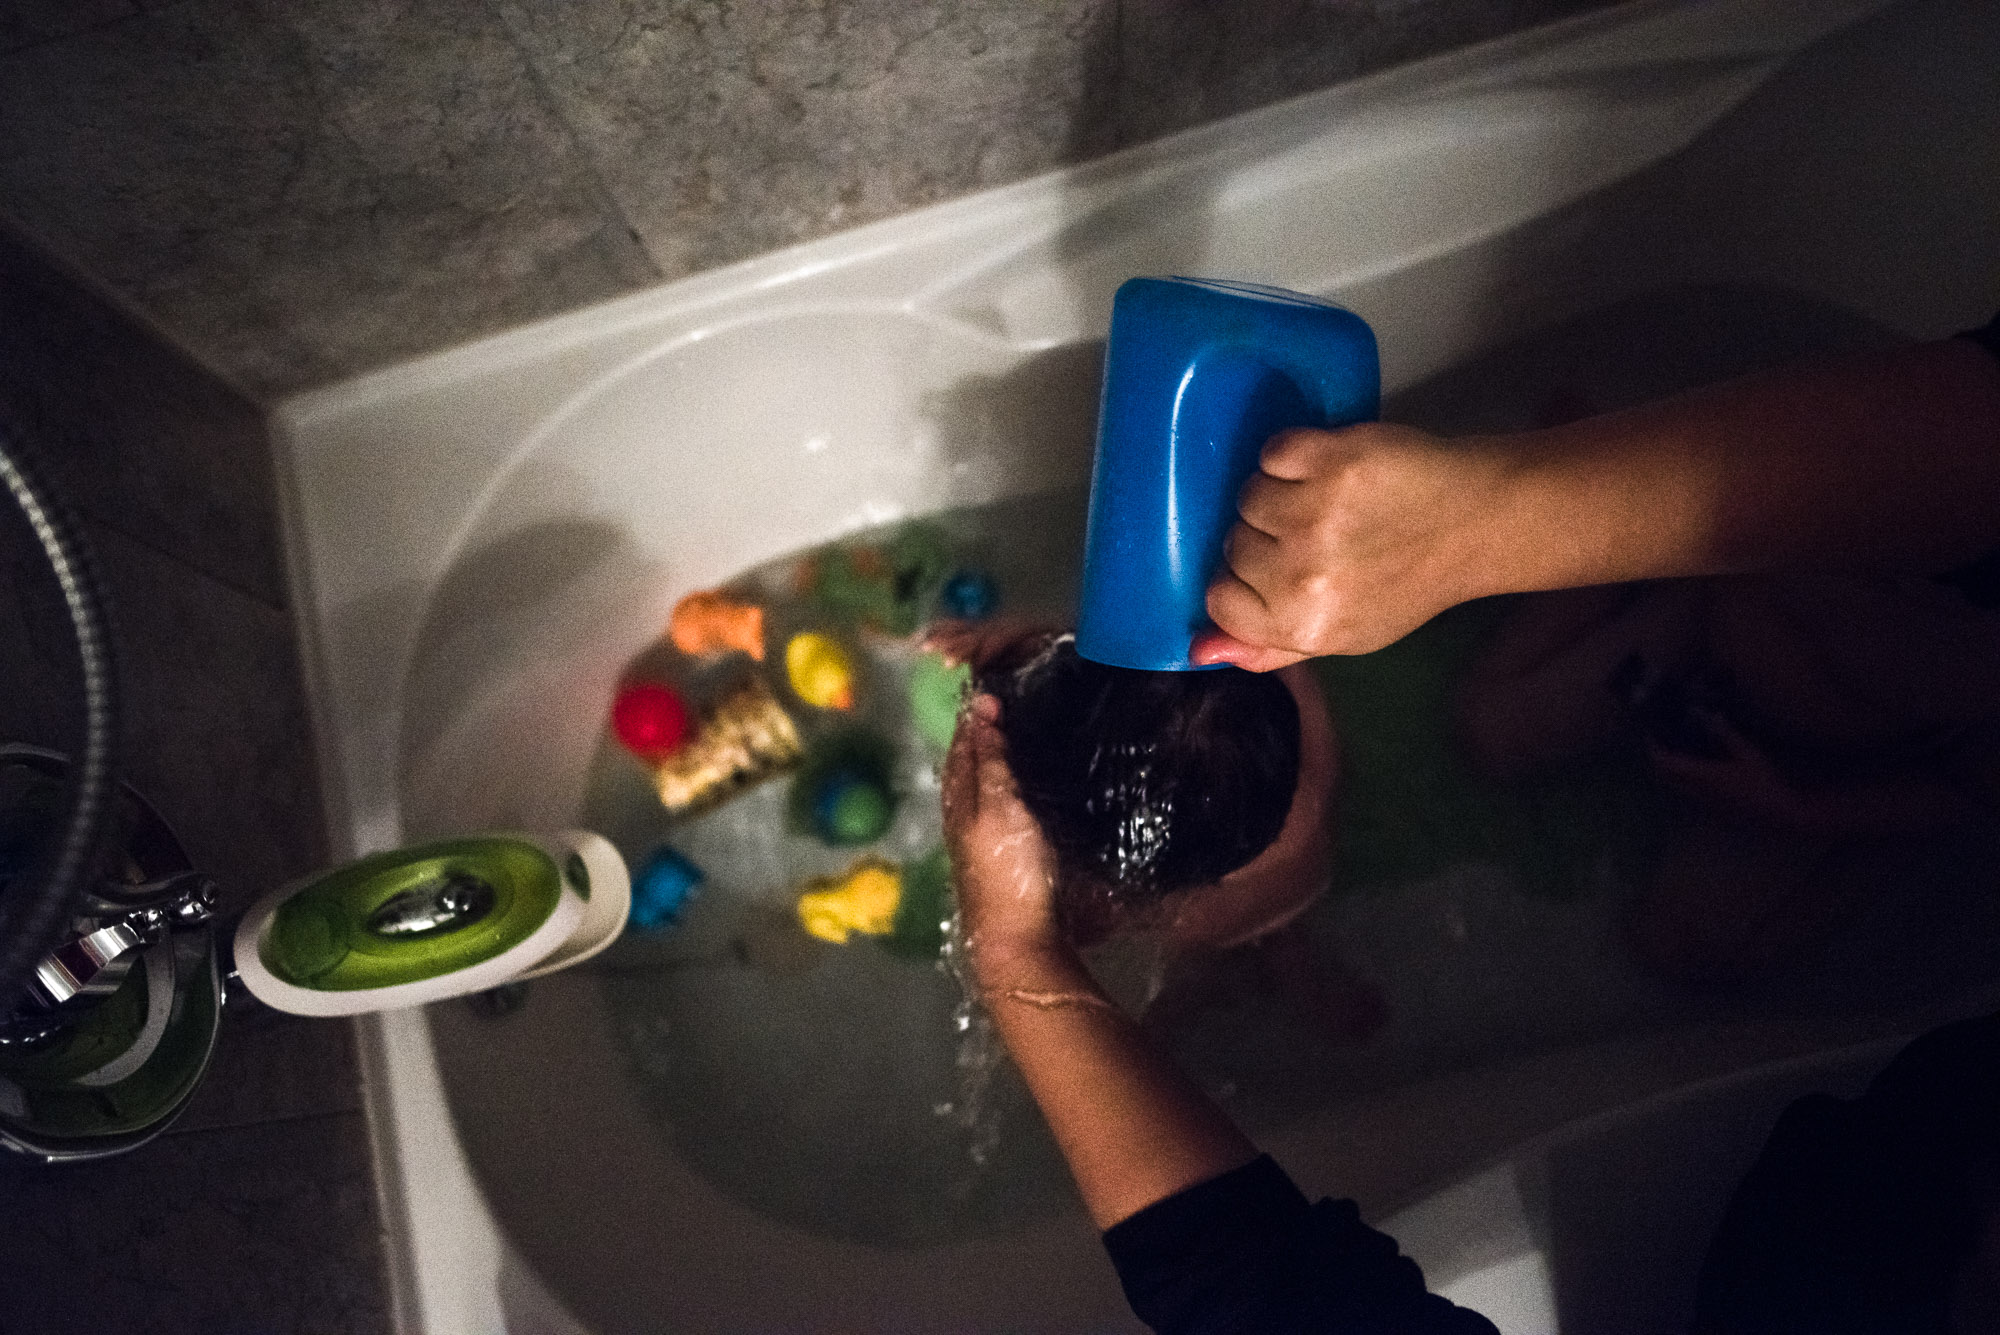 mom's hands pour water over boy's head in bathtub